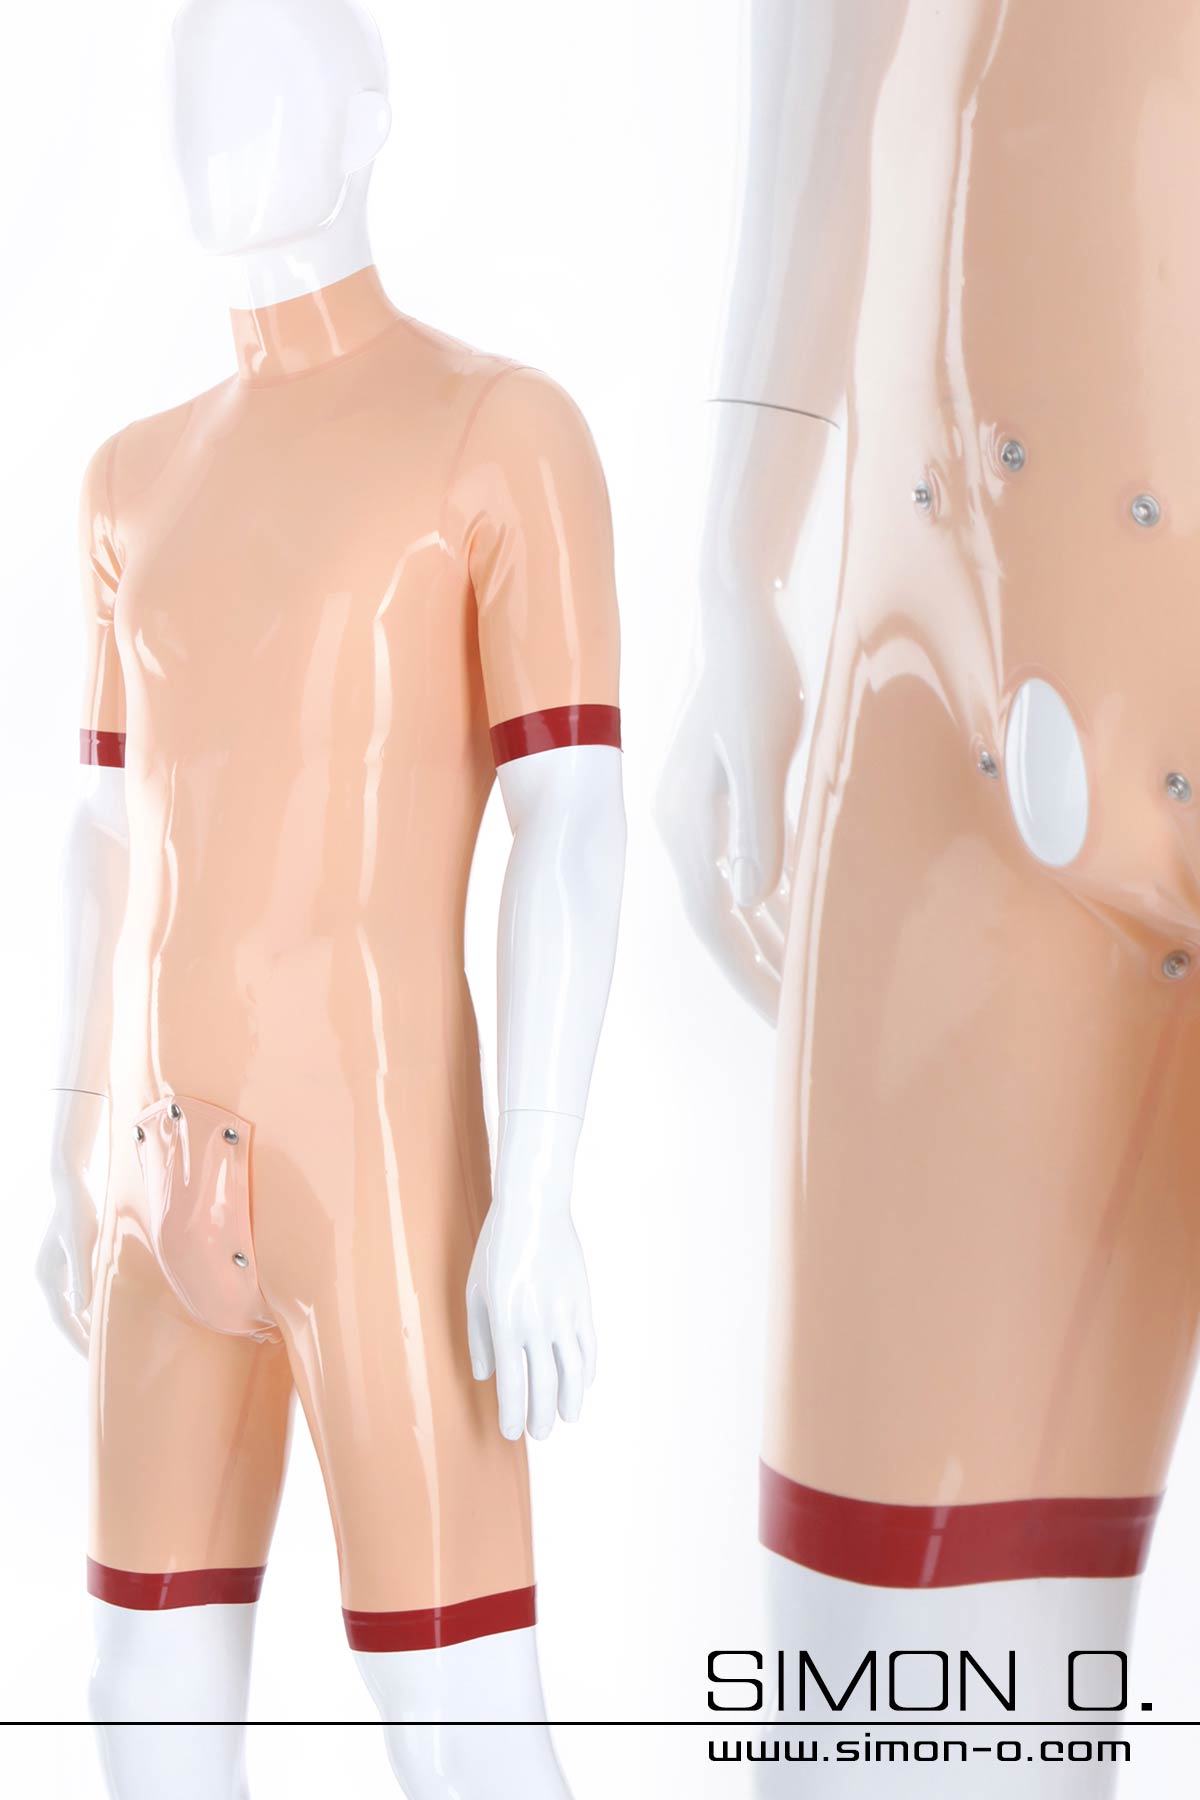 Latex surf suit with codpiece in skin color with short arms and legs